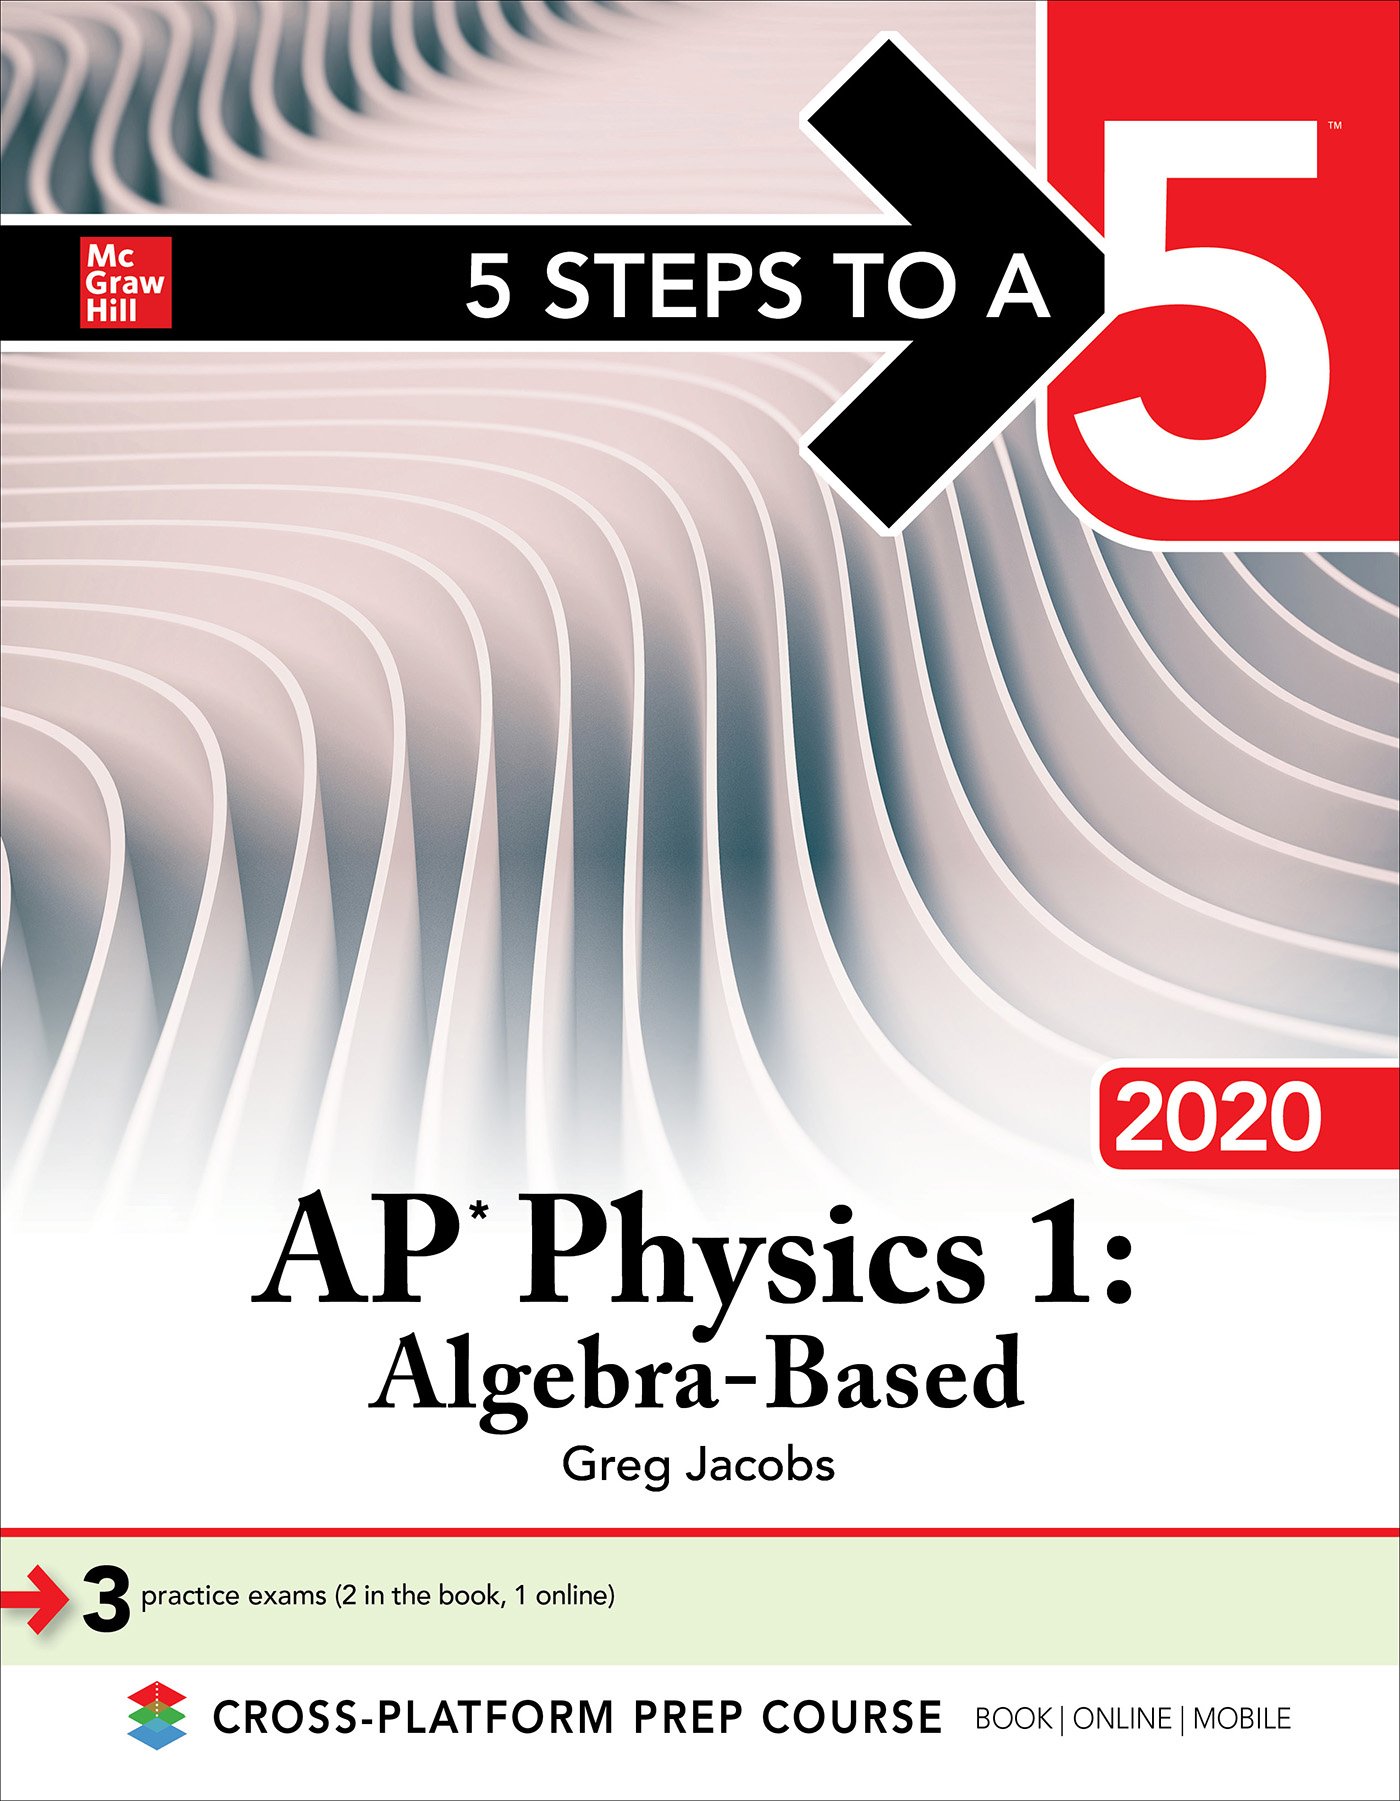 Download 5 Steps to a 5 AP Physics 1, AlgebraBased 2020 (5 Steps to a